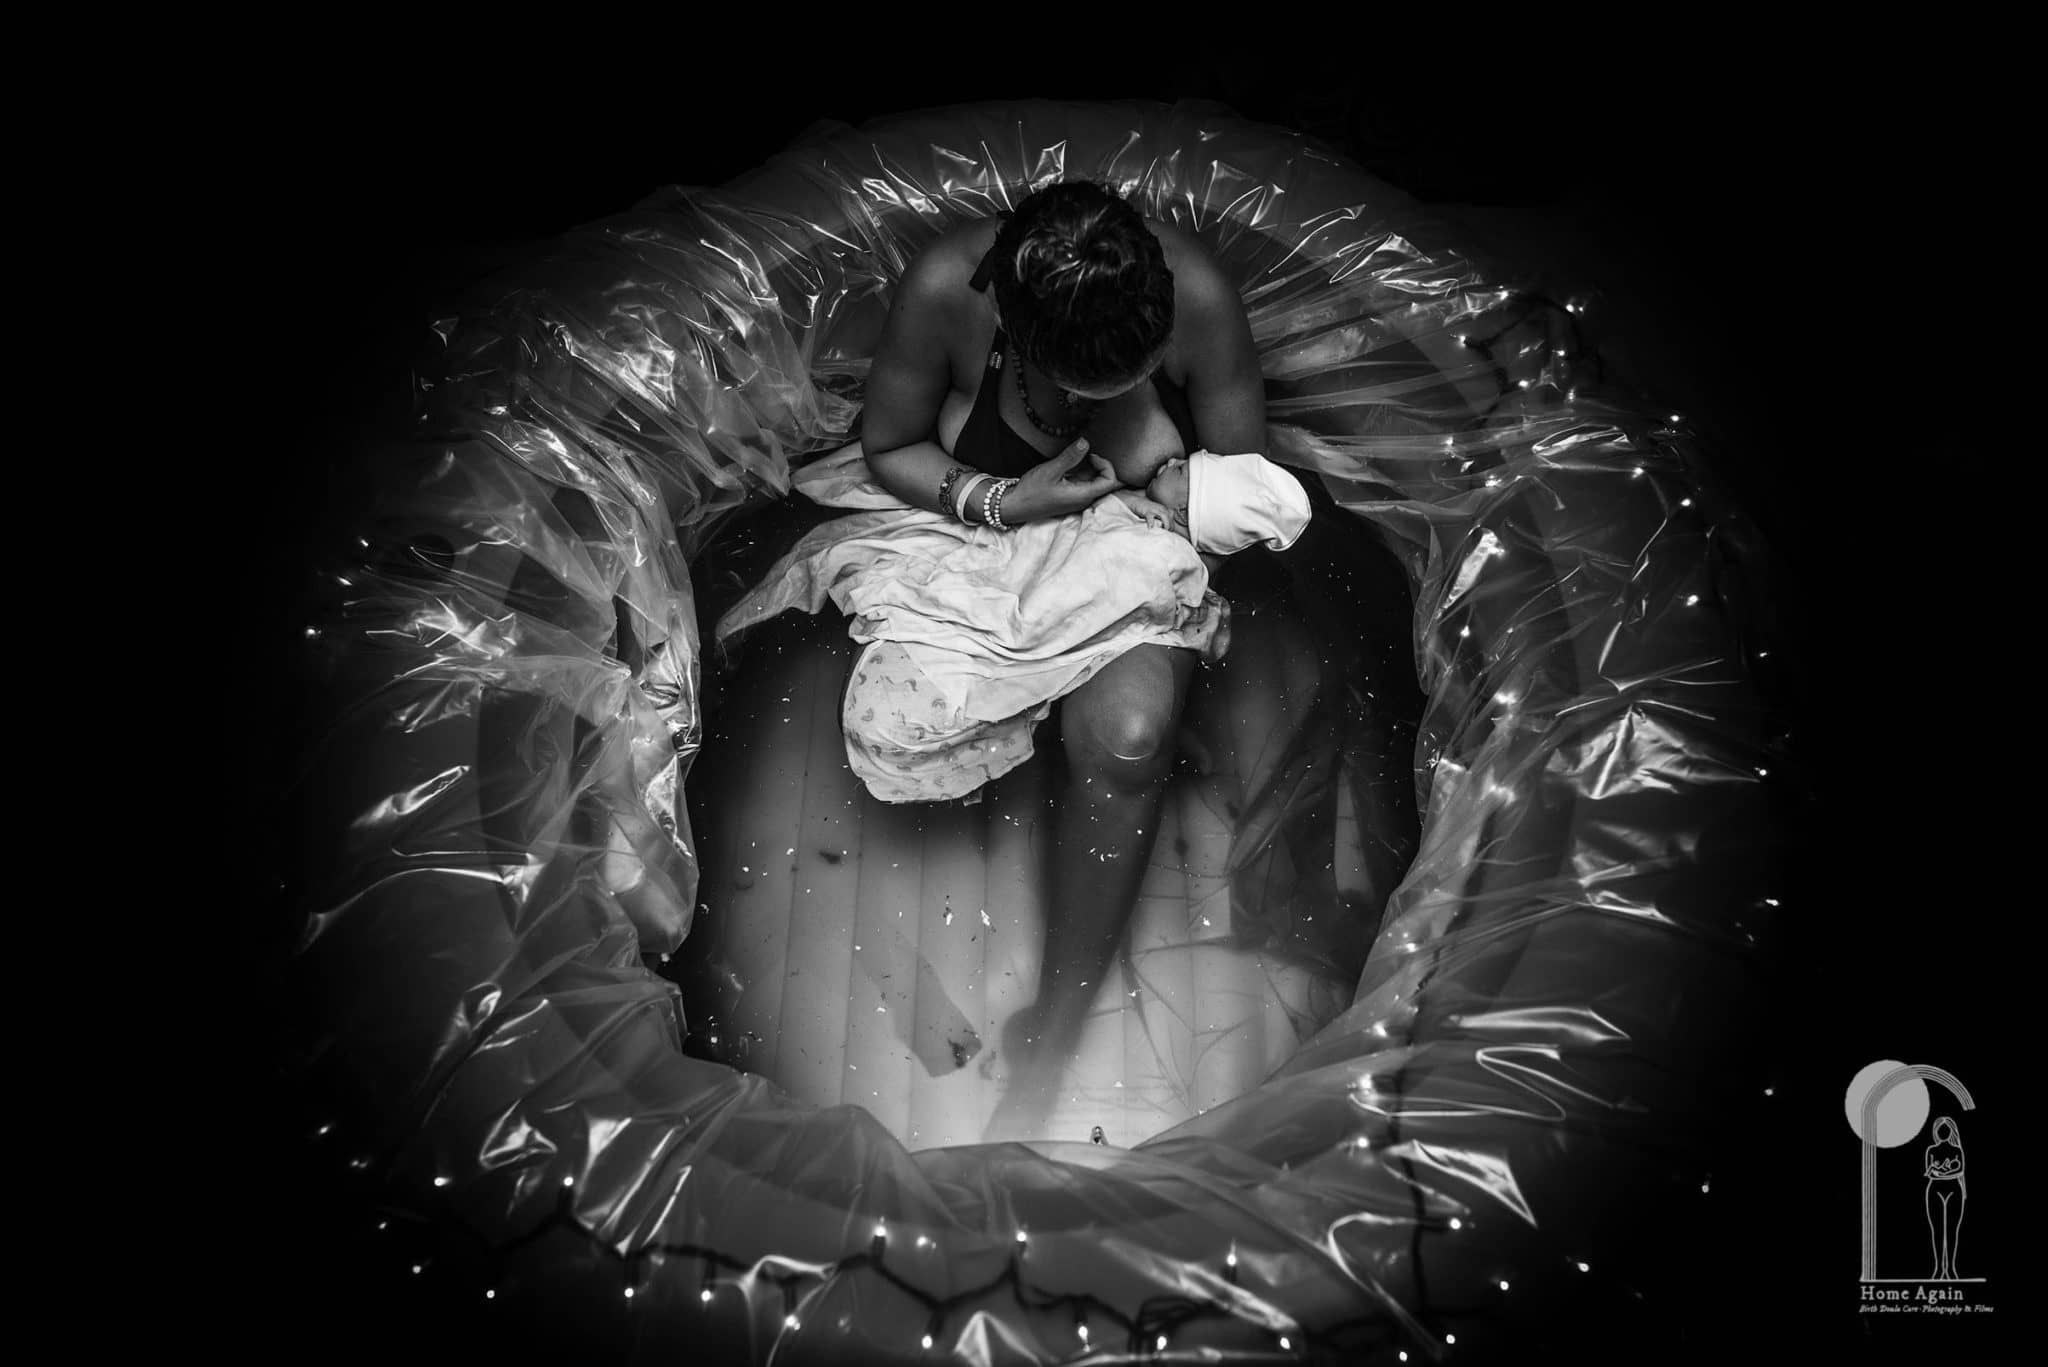 A woman holds her baby in a tub of water post birth